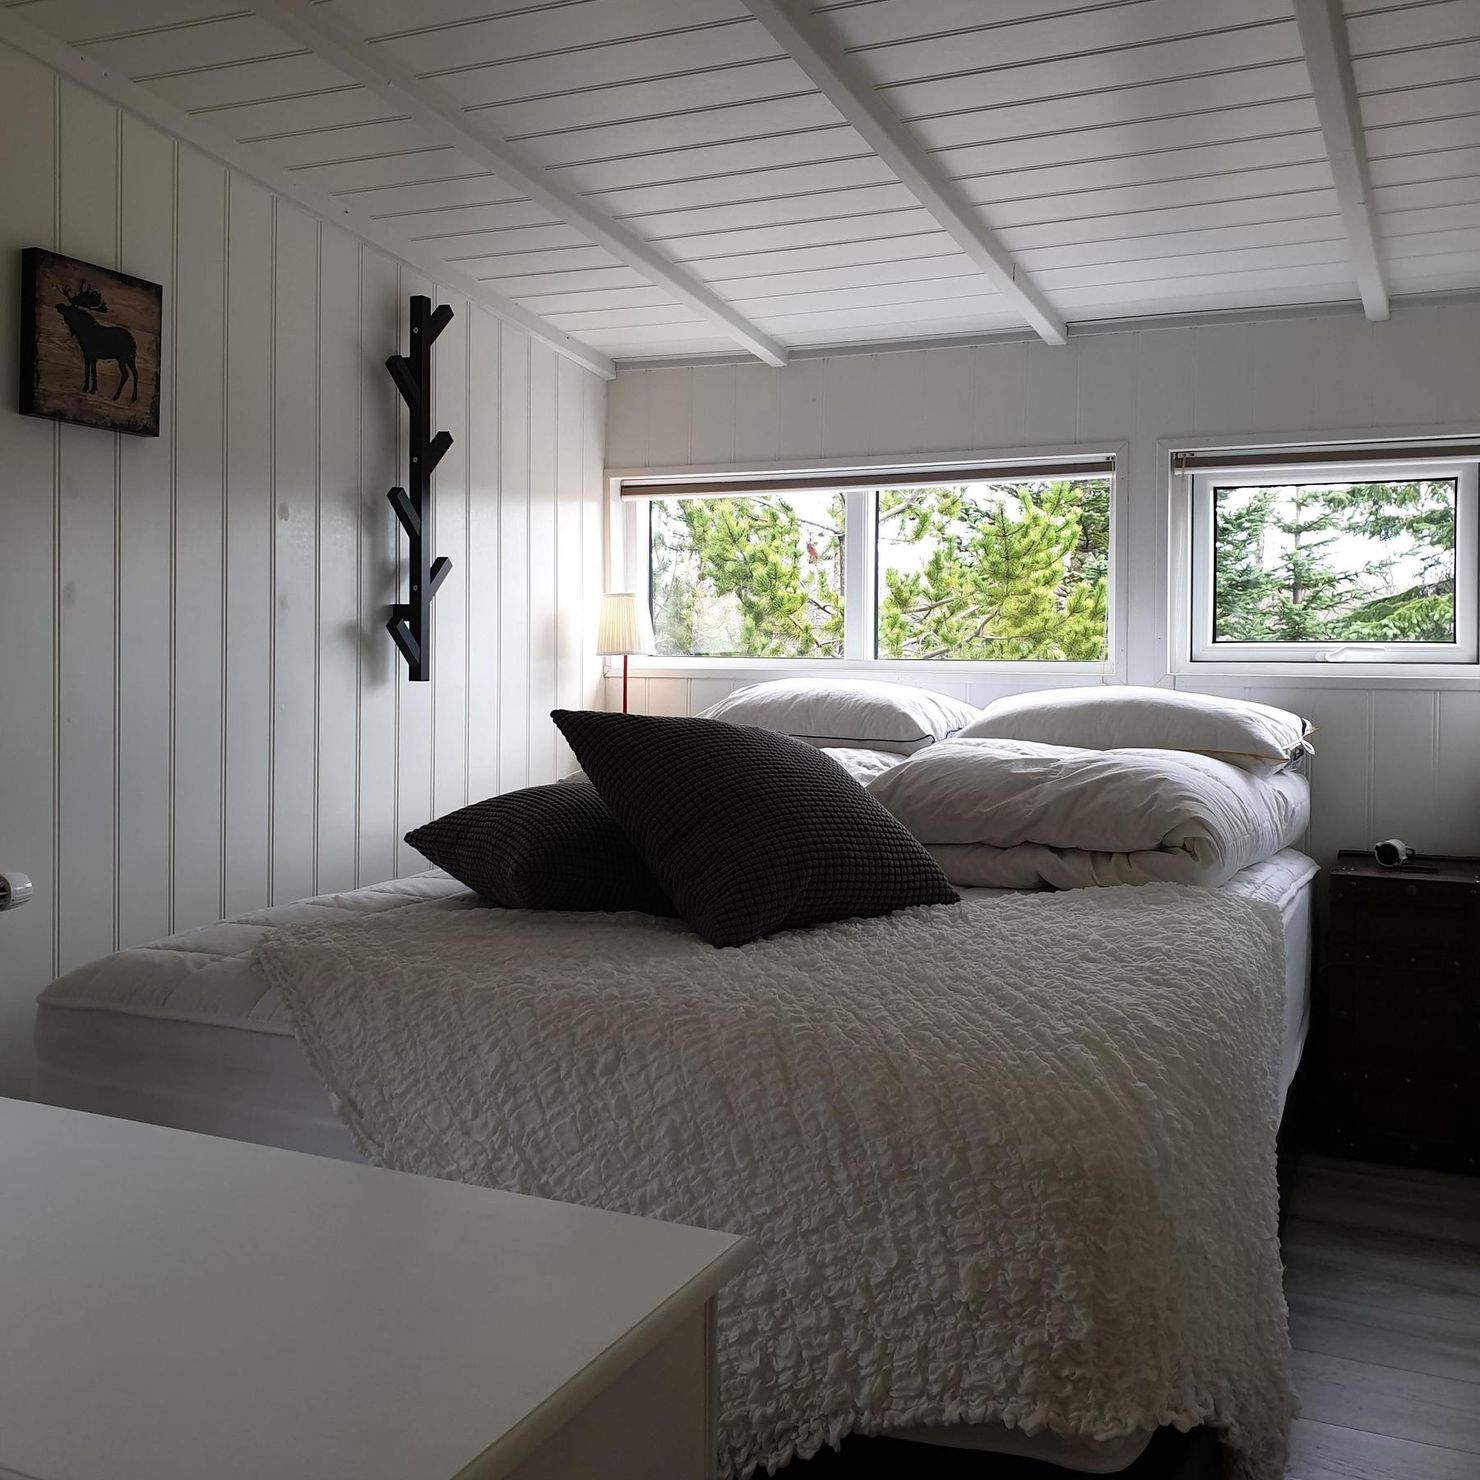 Scandinavian style with cosy double bed and white painted wood panelling